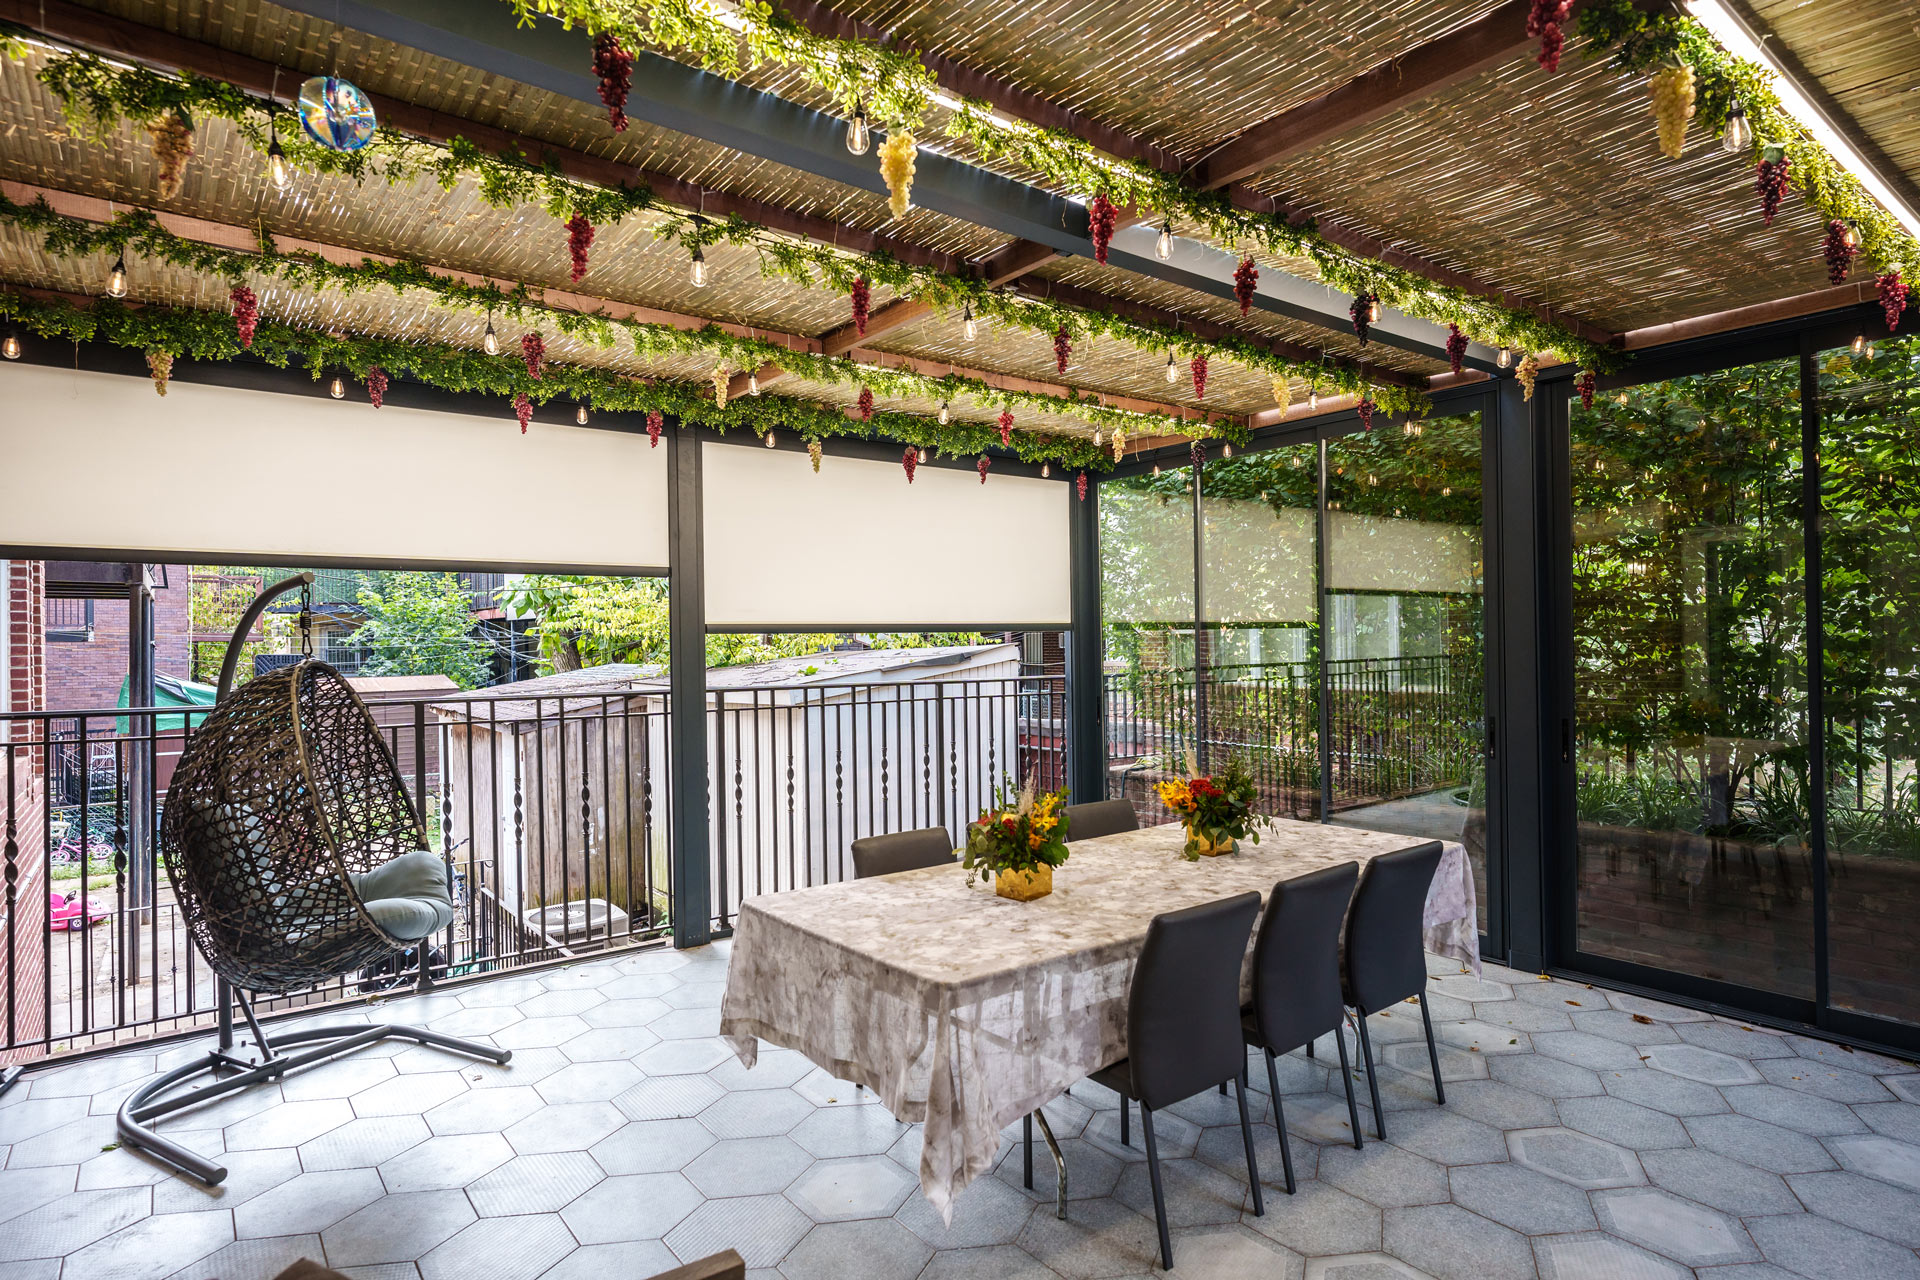 Featured image: A patio with a table and chairs and pergola Sukkah application - Read full post: 5 Creative Sukkah Decorations to Make Your Pergola Sukkah Stand Out